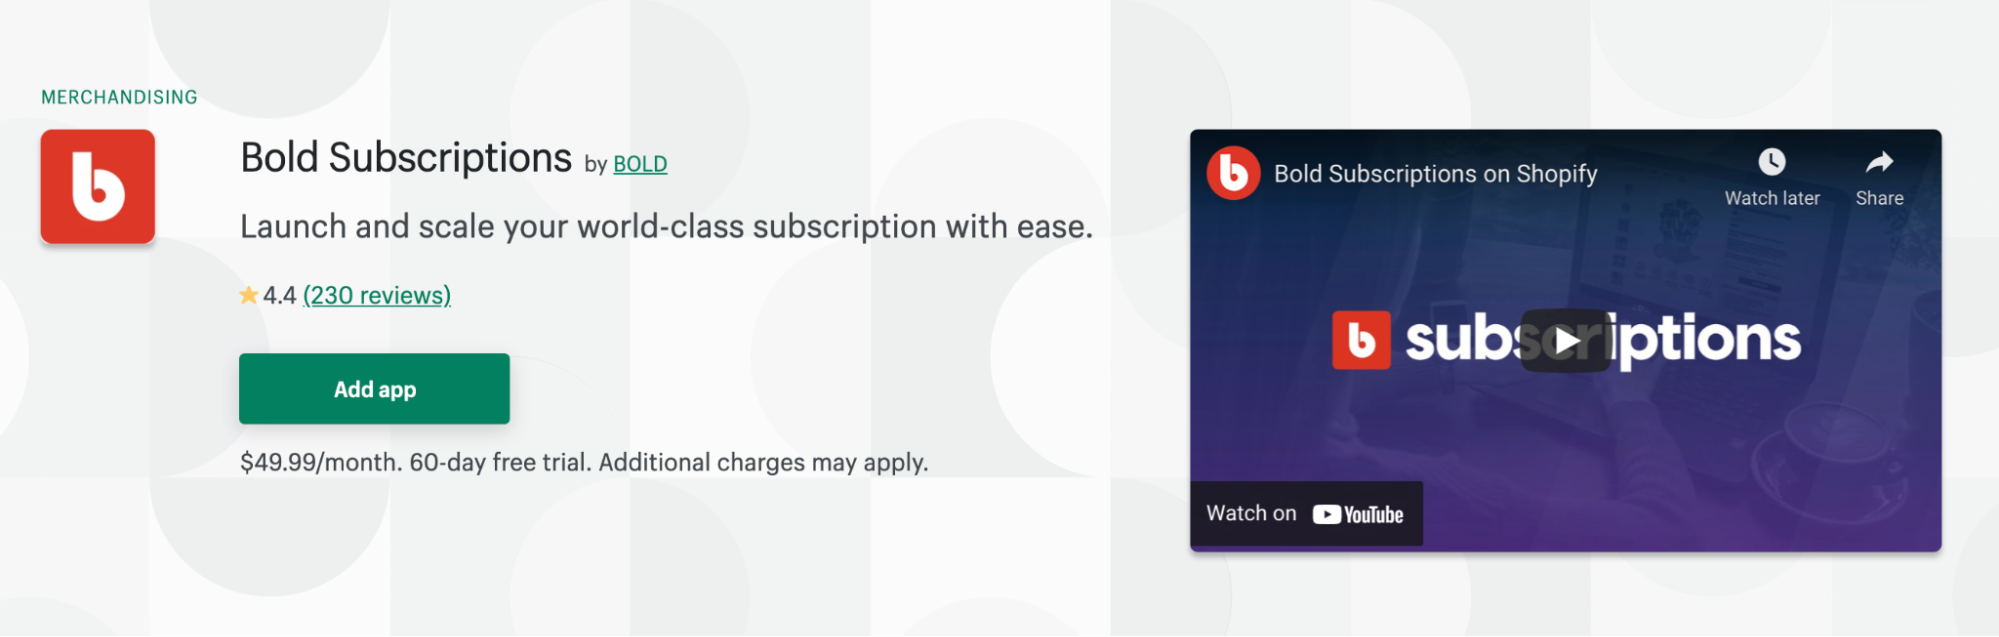 Bold subscriptions 